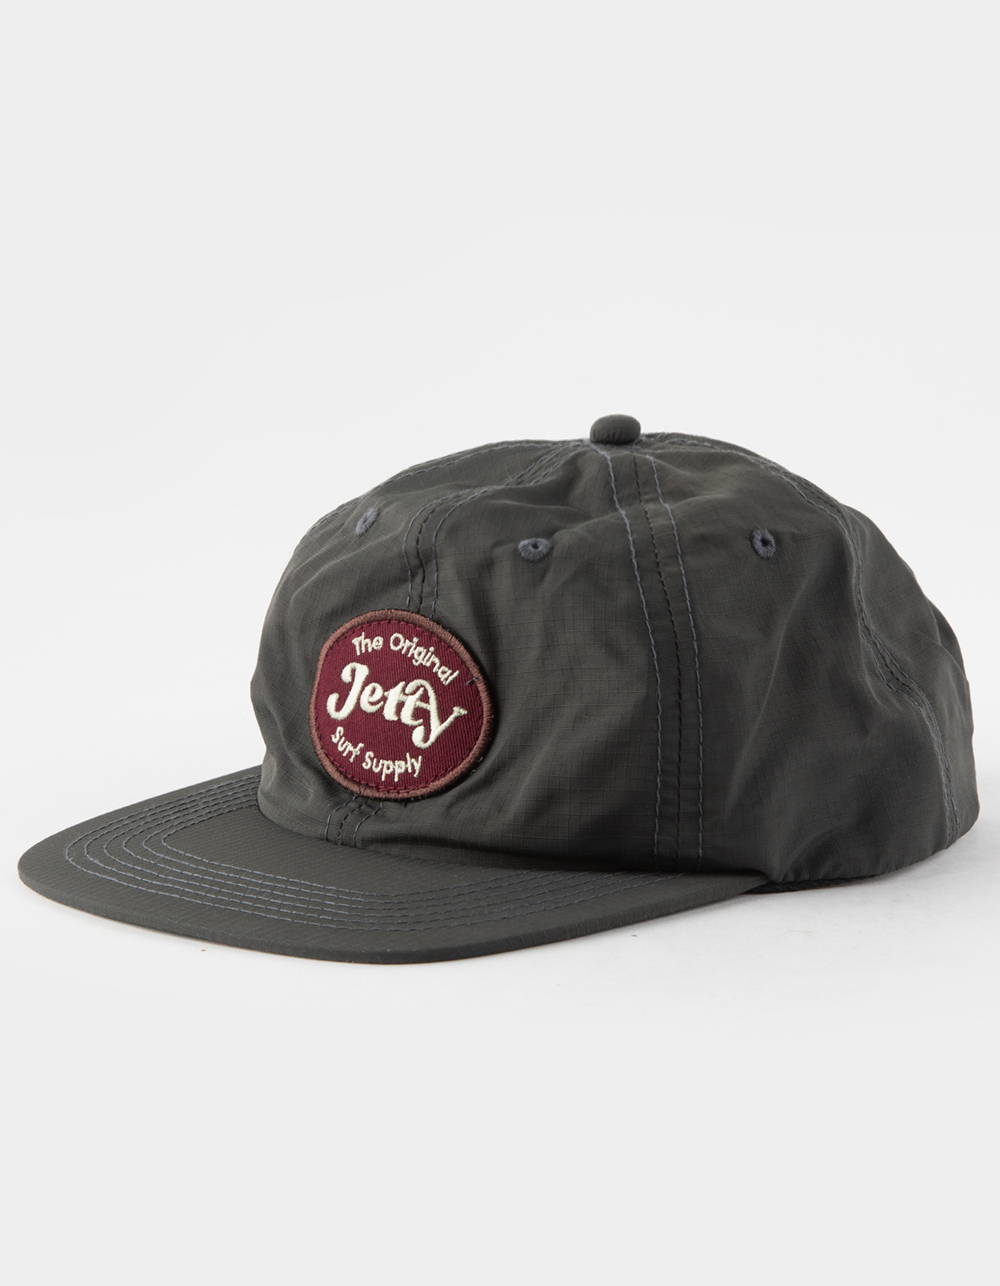 JETTY Banquet Mens Snapback Hat - CHARCOAL | Tillys